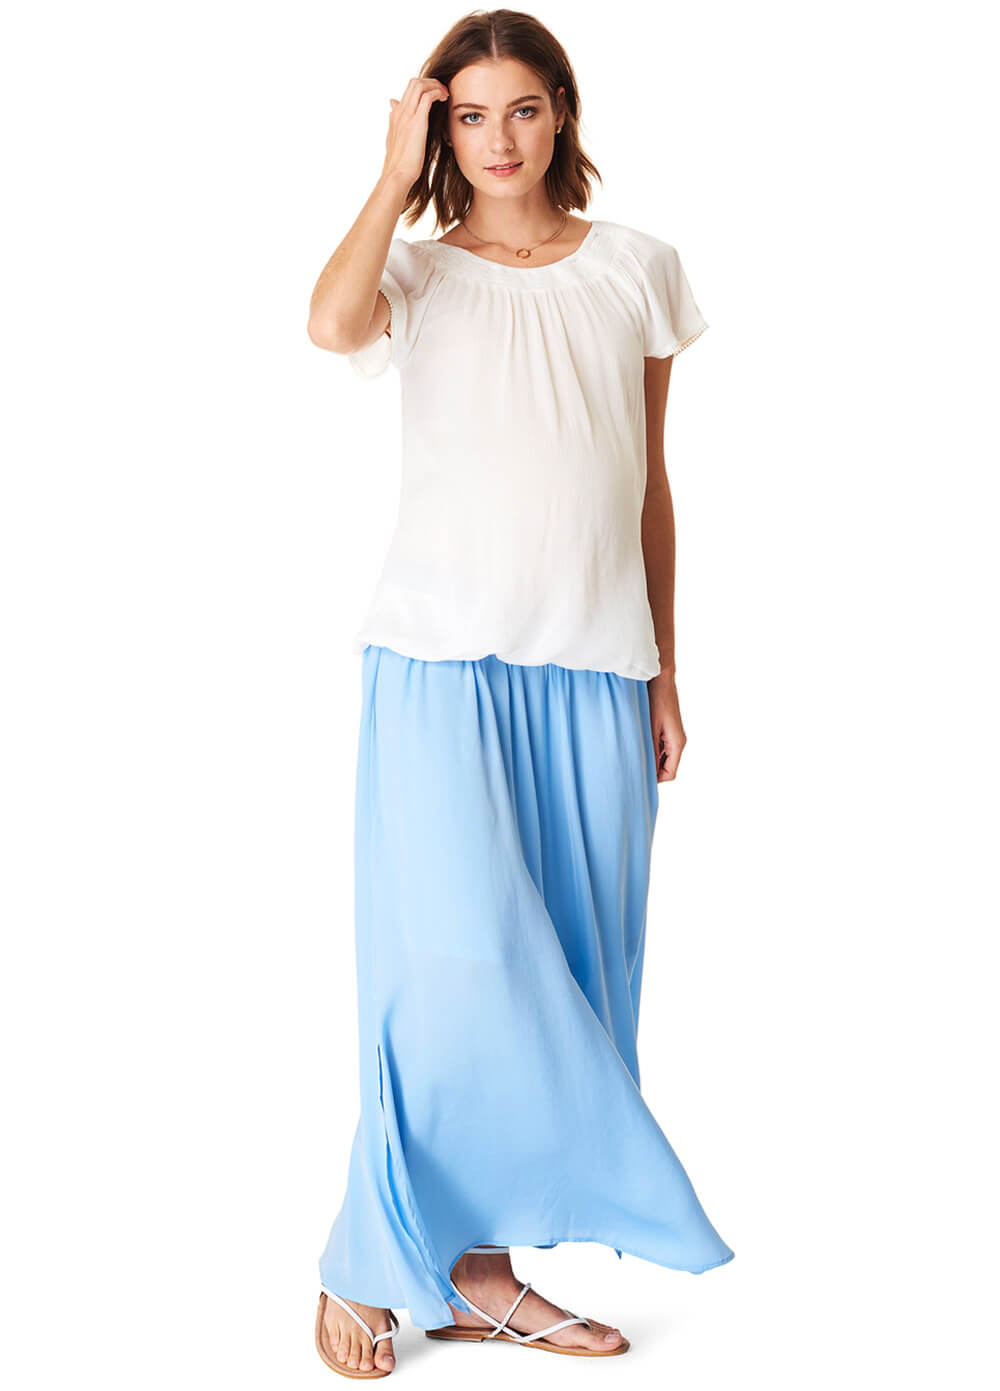 Sky Blue Gathered Maxi Maternity Skirt by Esprit